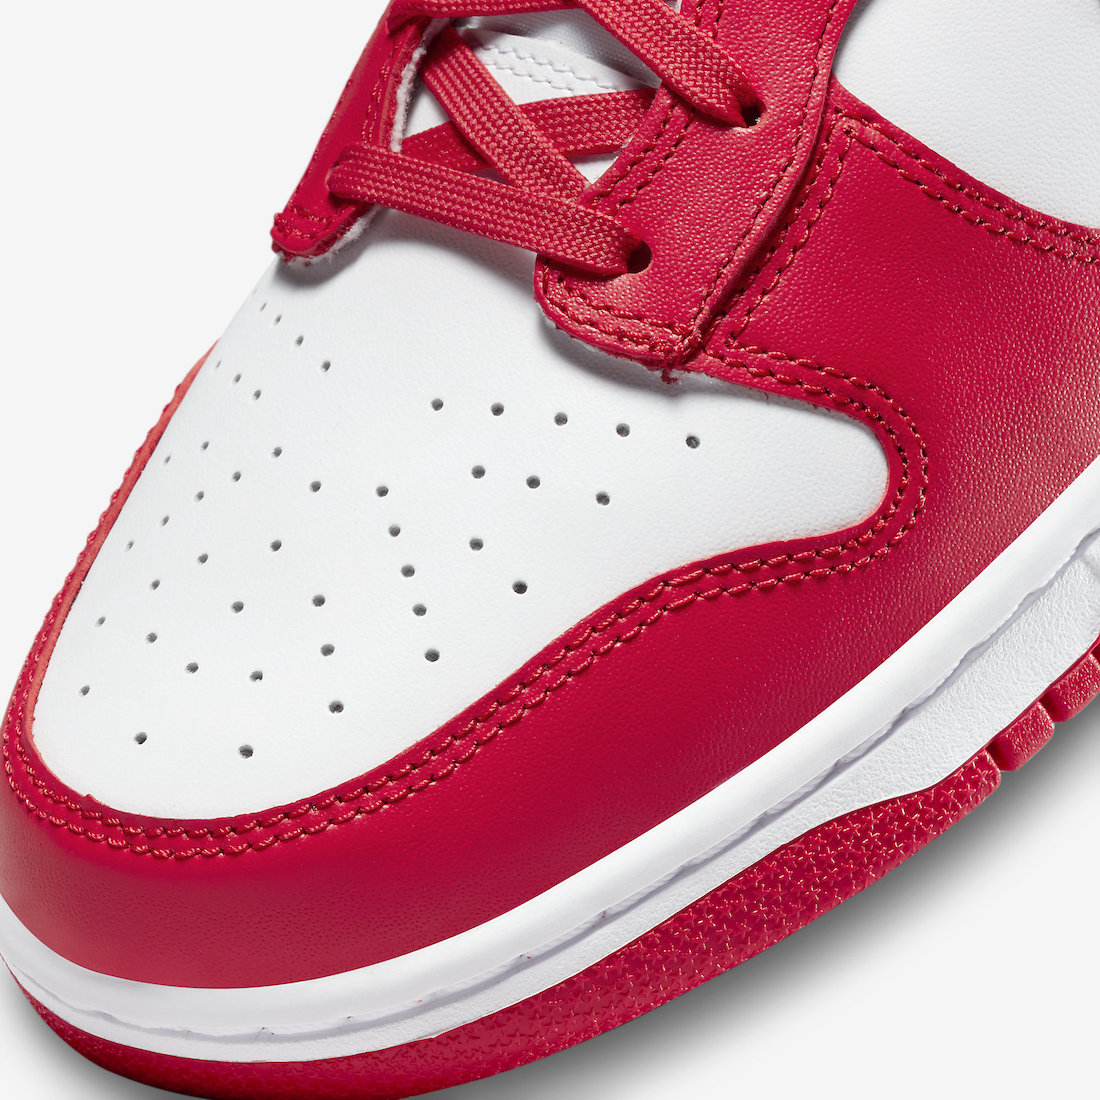 Nike-Dunk-High-White-University-Red-DD1399-106-Release-Date-6